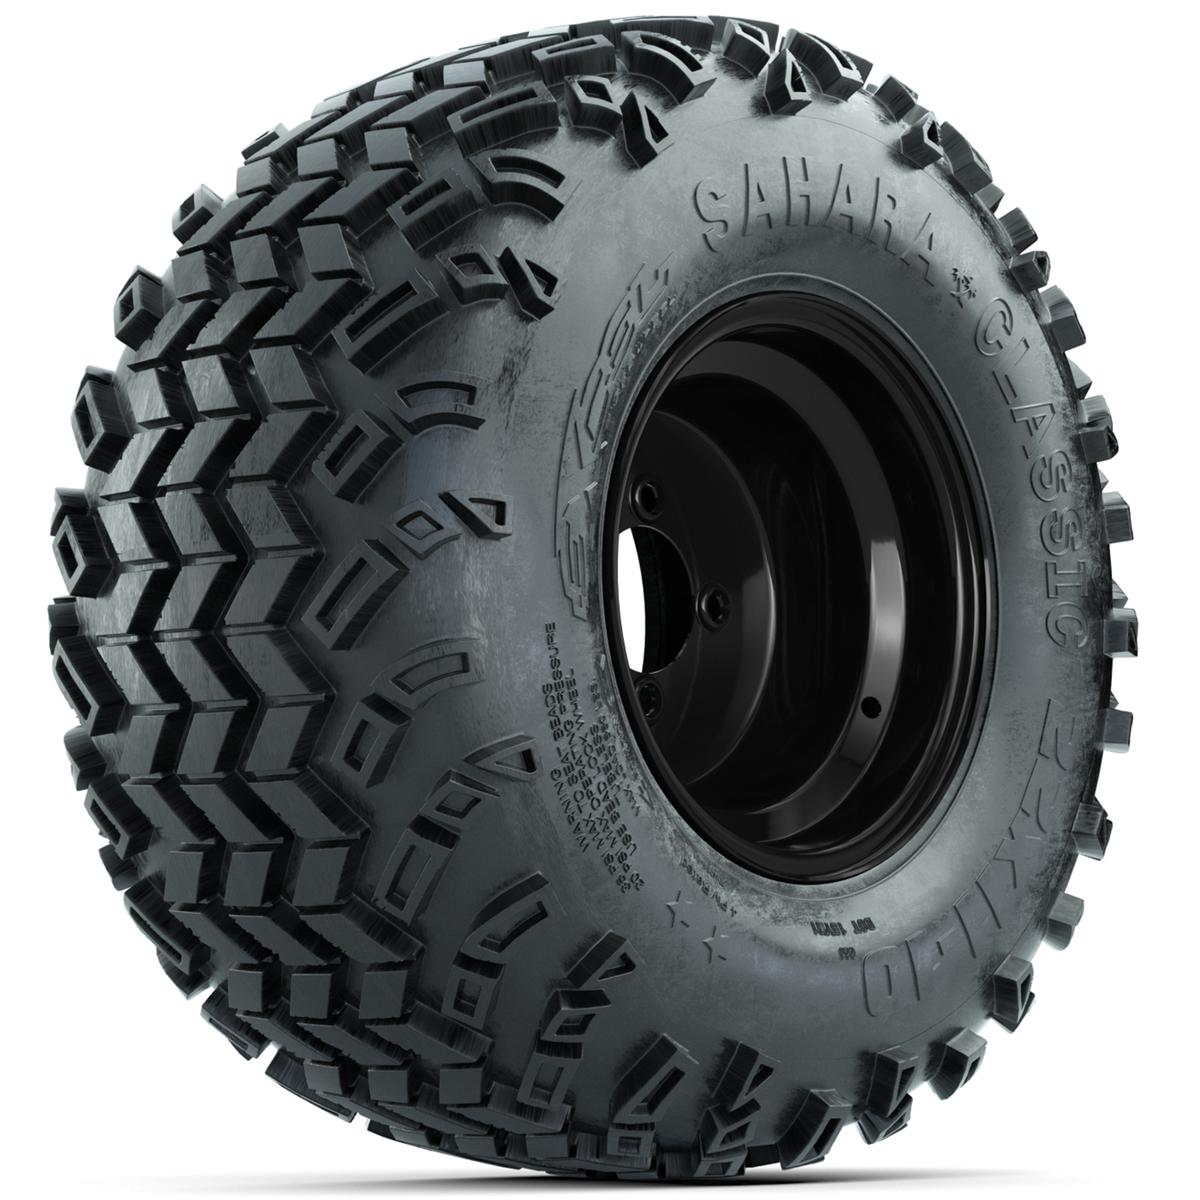 Set of (4) 10 in Black Steel Offset Wheels with 22x11-10 Sahara Classic All Terrain Tires